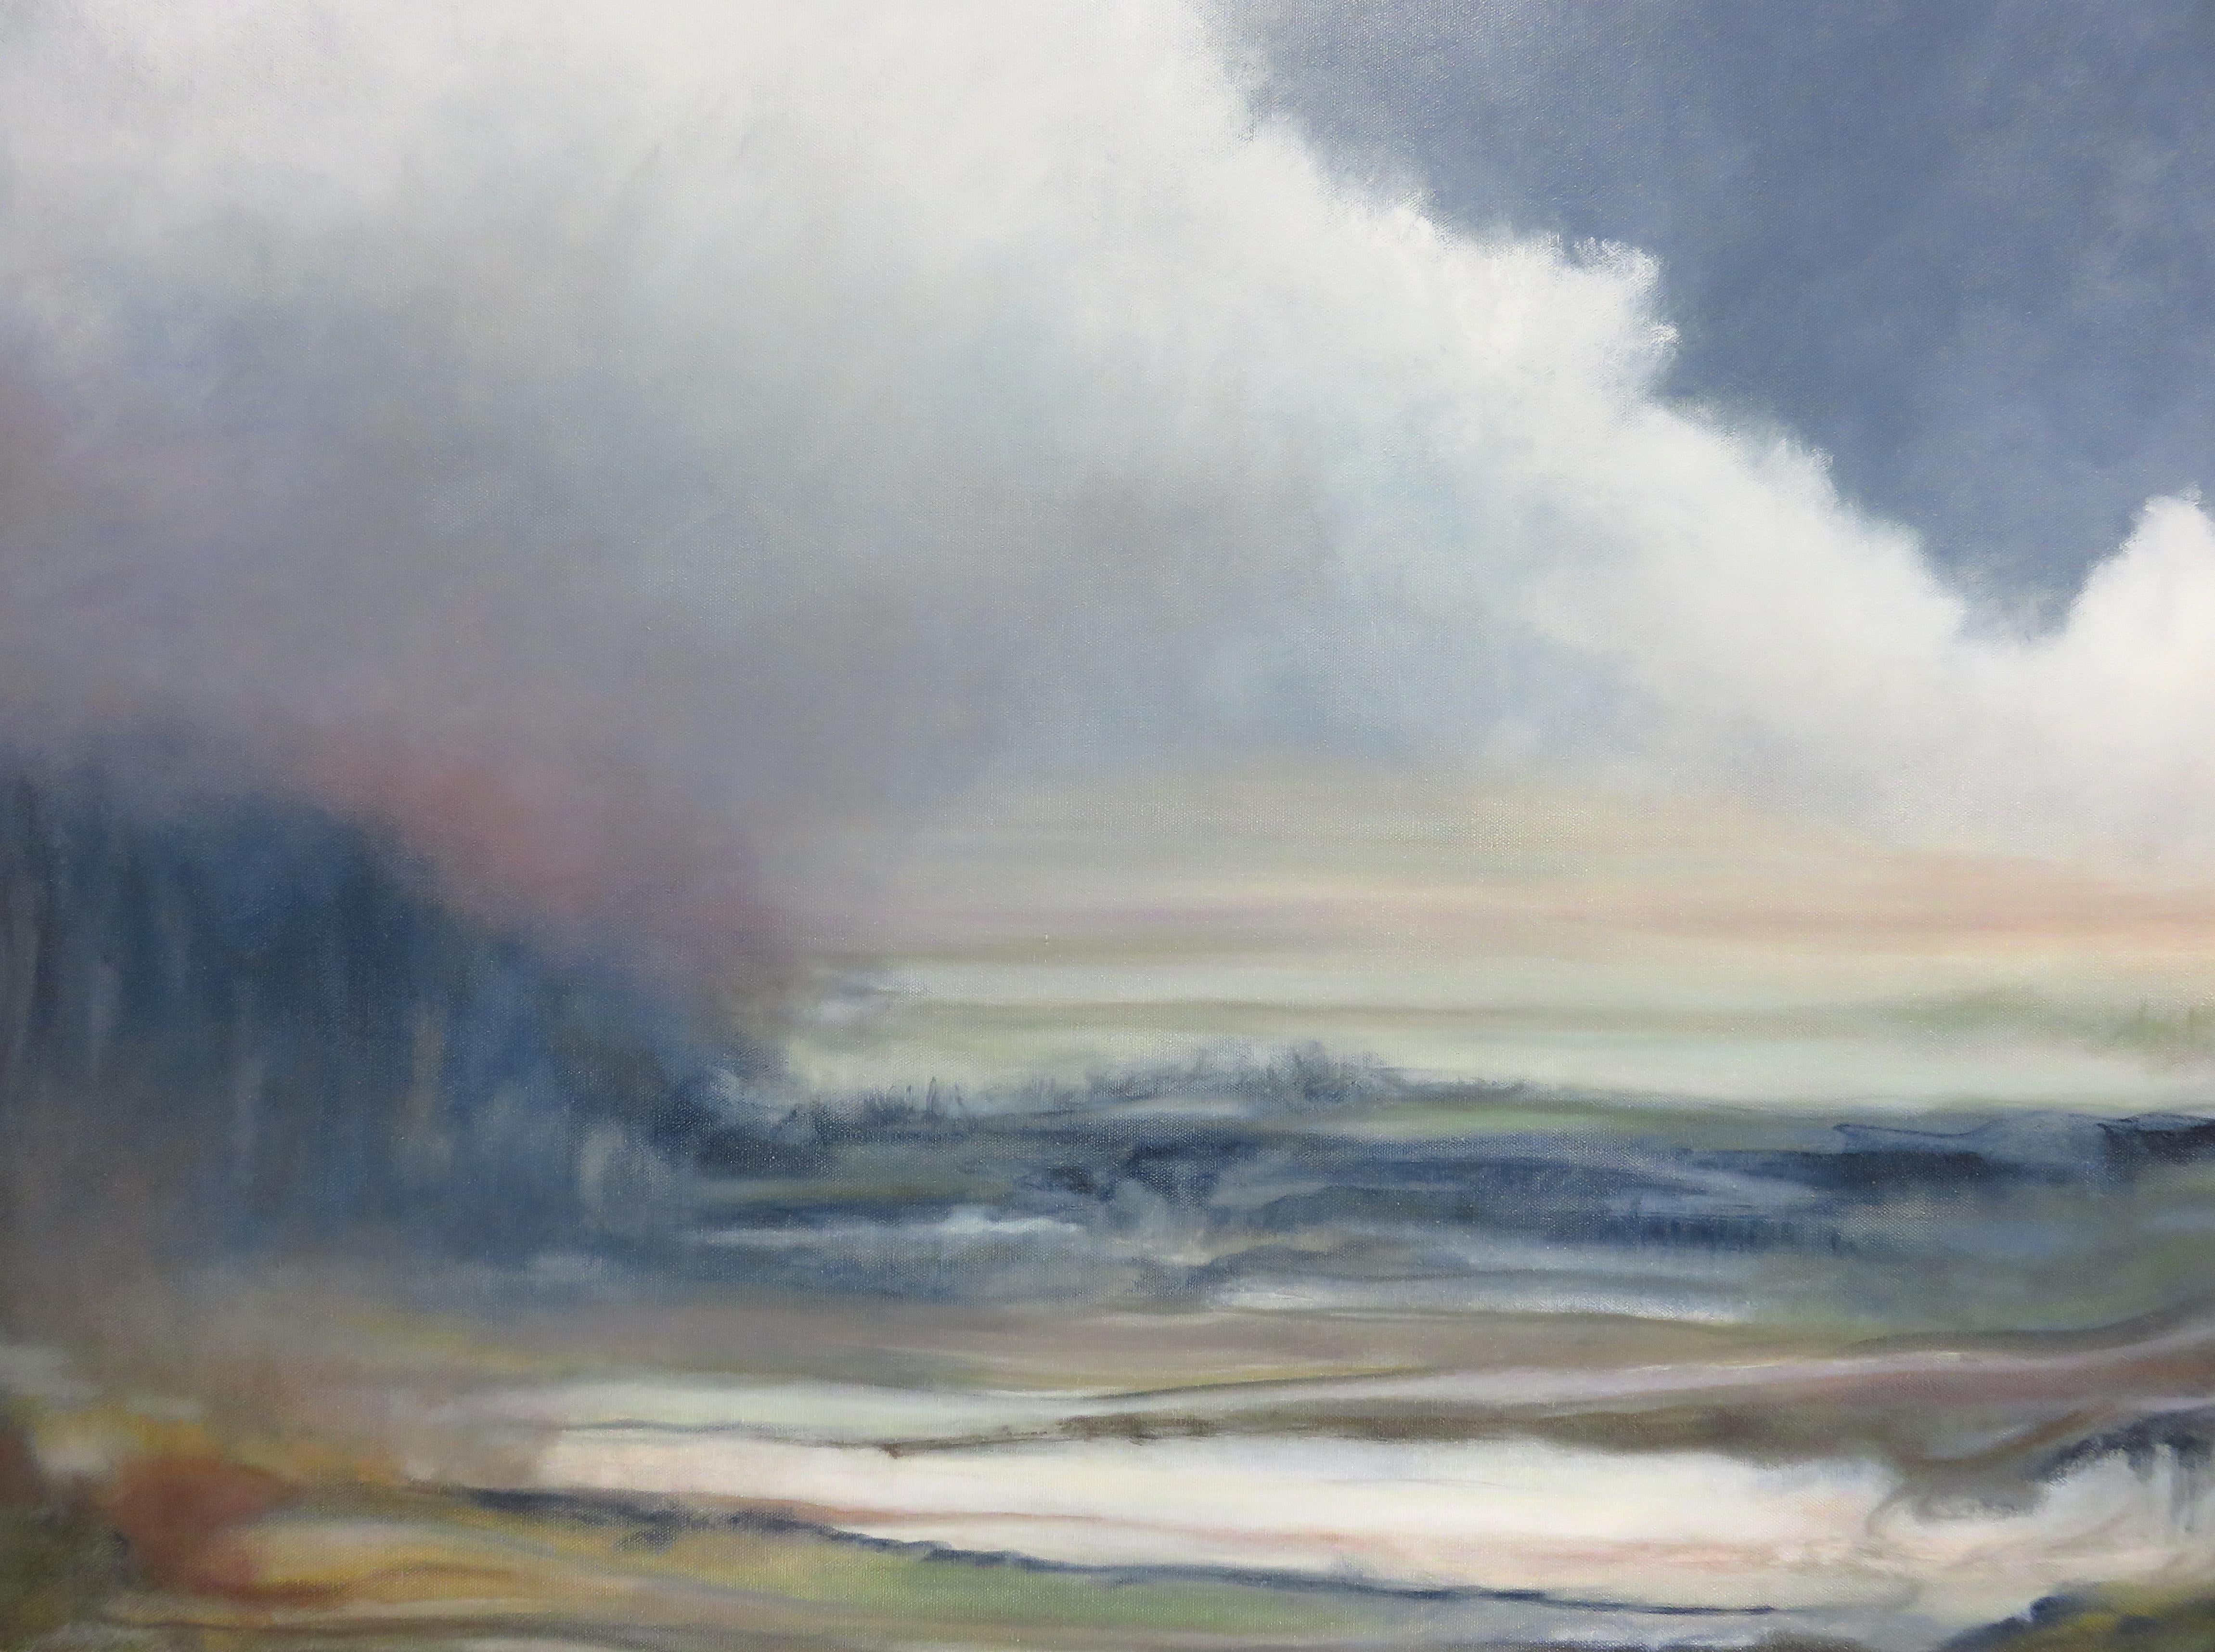 <p>Artist Comments<br>Artist Jenn Williamson demonstrates a misty marshland in this contemplative scene. The rhythmic rise and fall of tonal colors break into vaporous clouds hovering over the sky, setting a calming and ethereal ambiance. Jenn